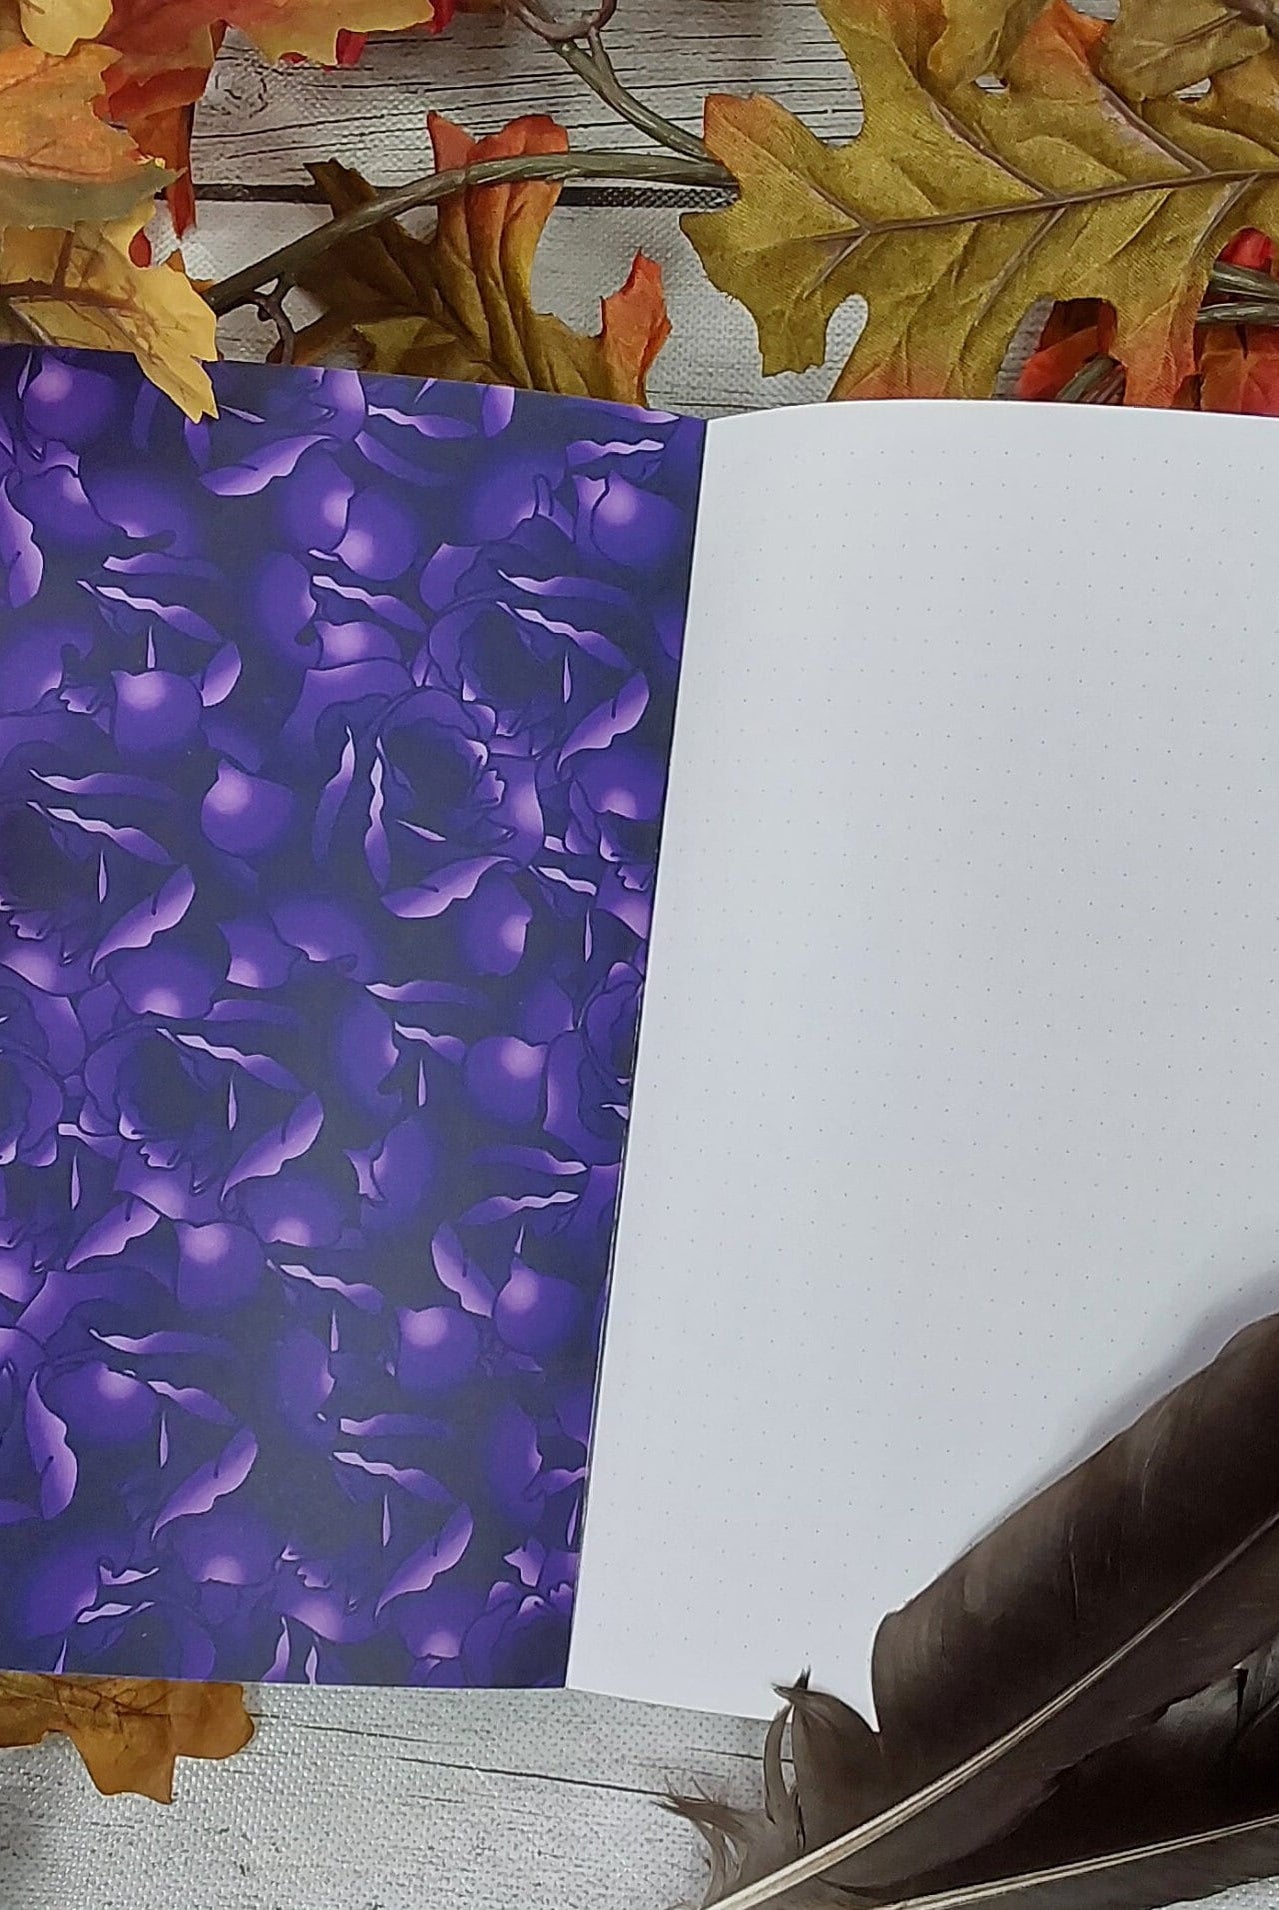 LAYFLAT NOTEBOOK: Become a Witch Worth Burning Coffin , Purple Coffin and Flames Art , Purple Witchy Layflat , Mental Health Stationery